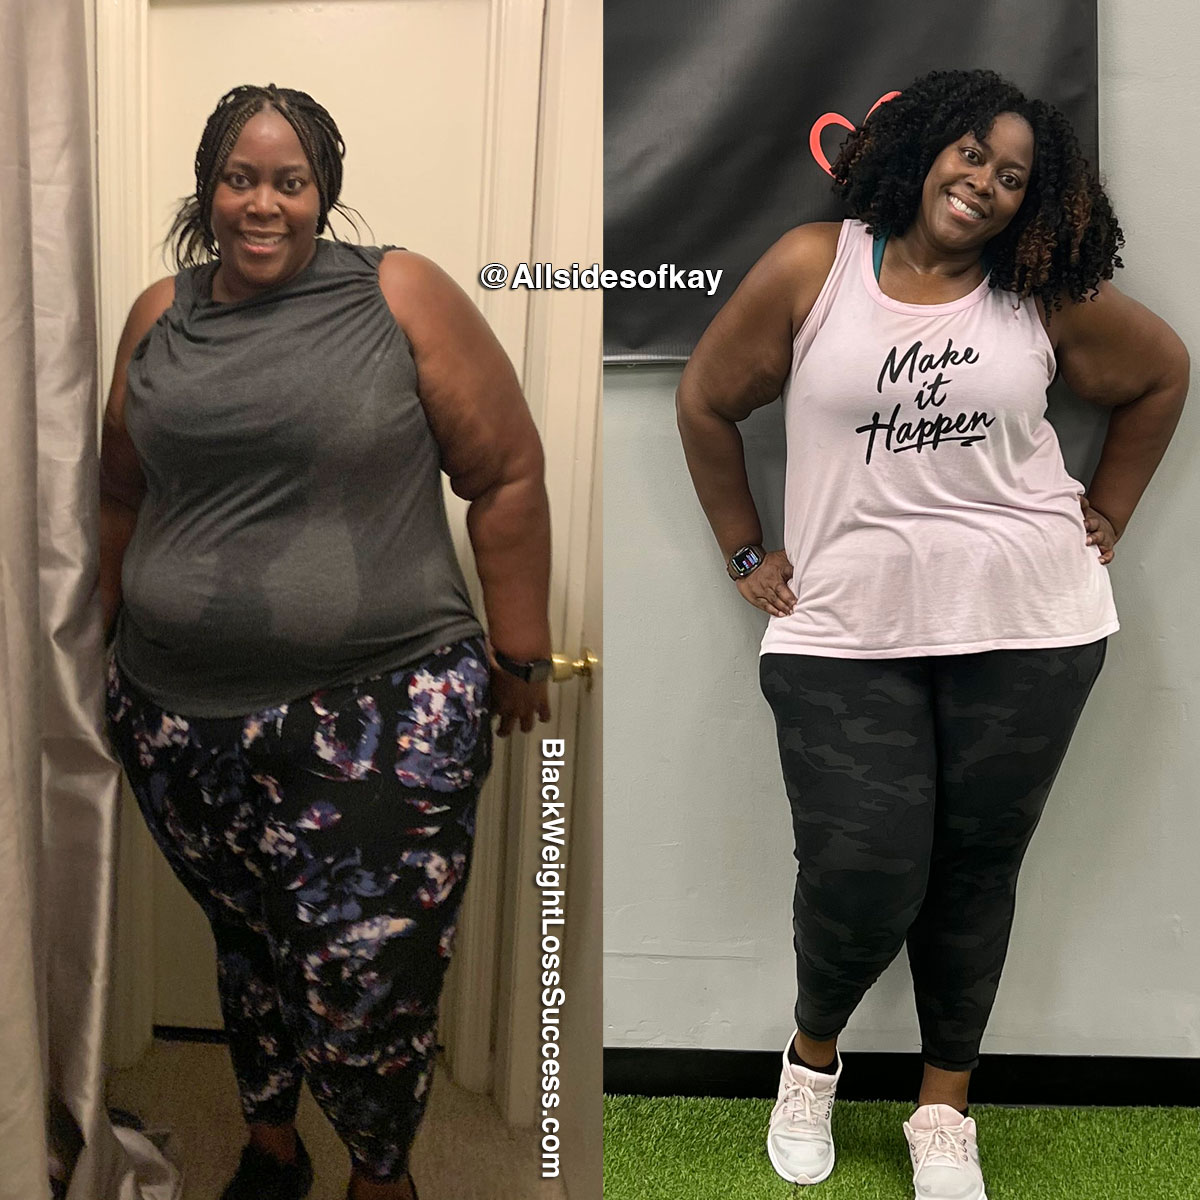 Kelly lost 116 pounds | Black Weight Loss Success